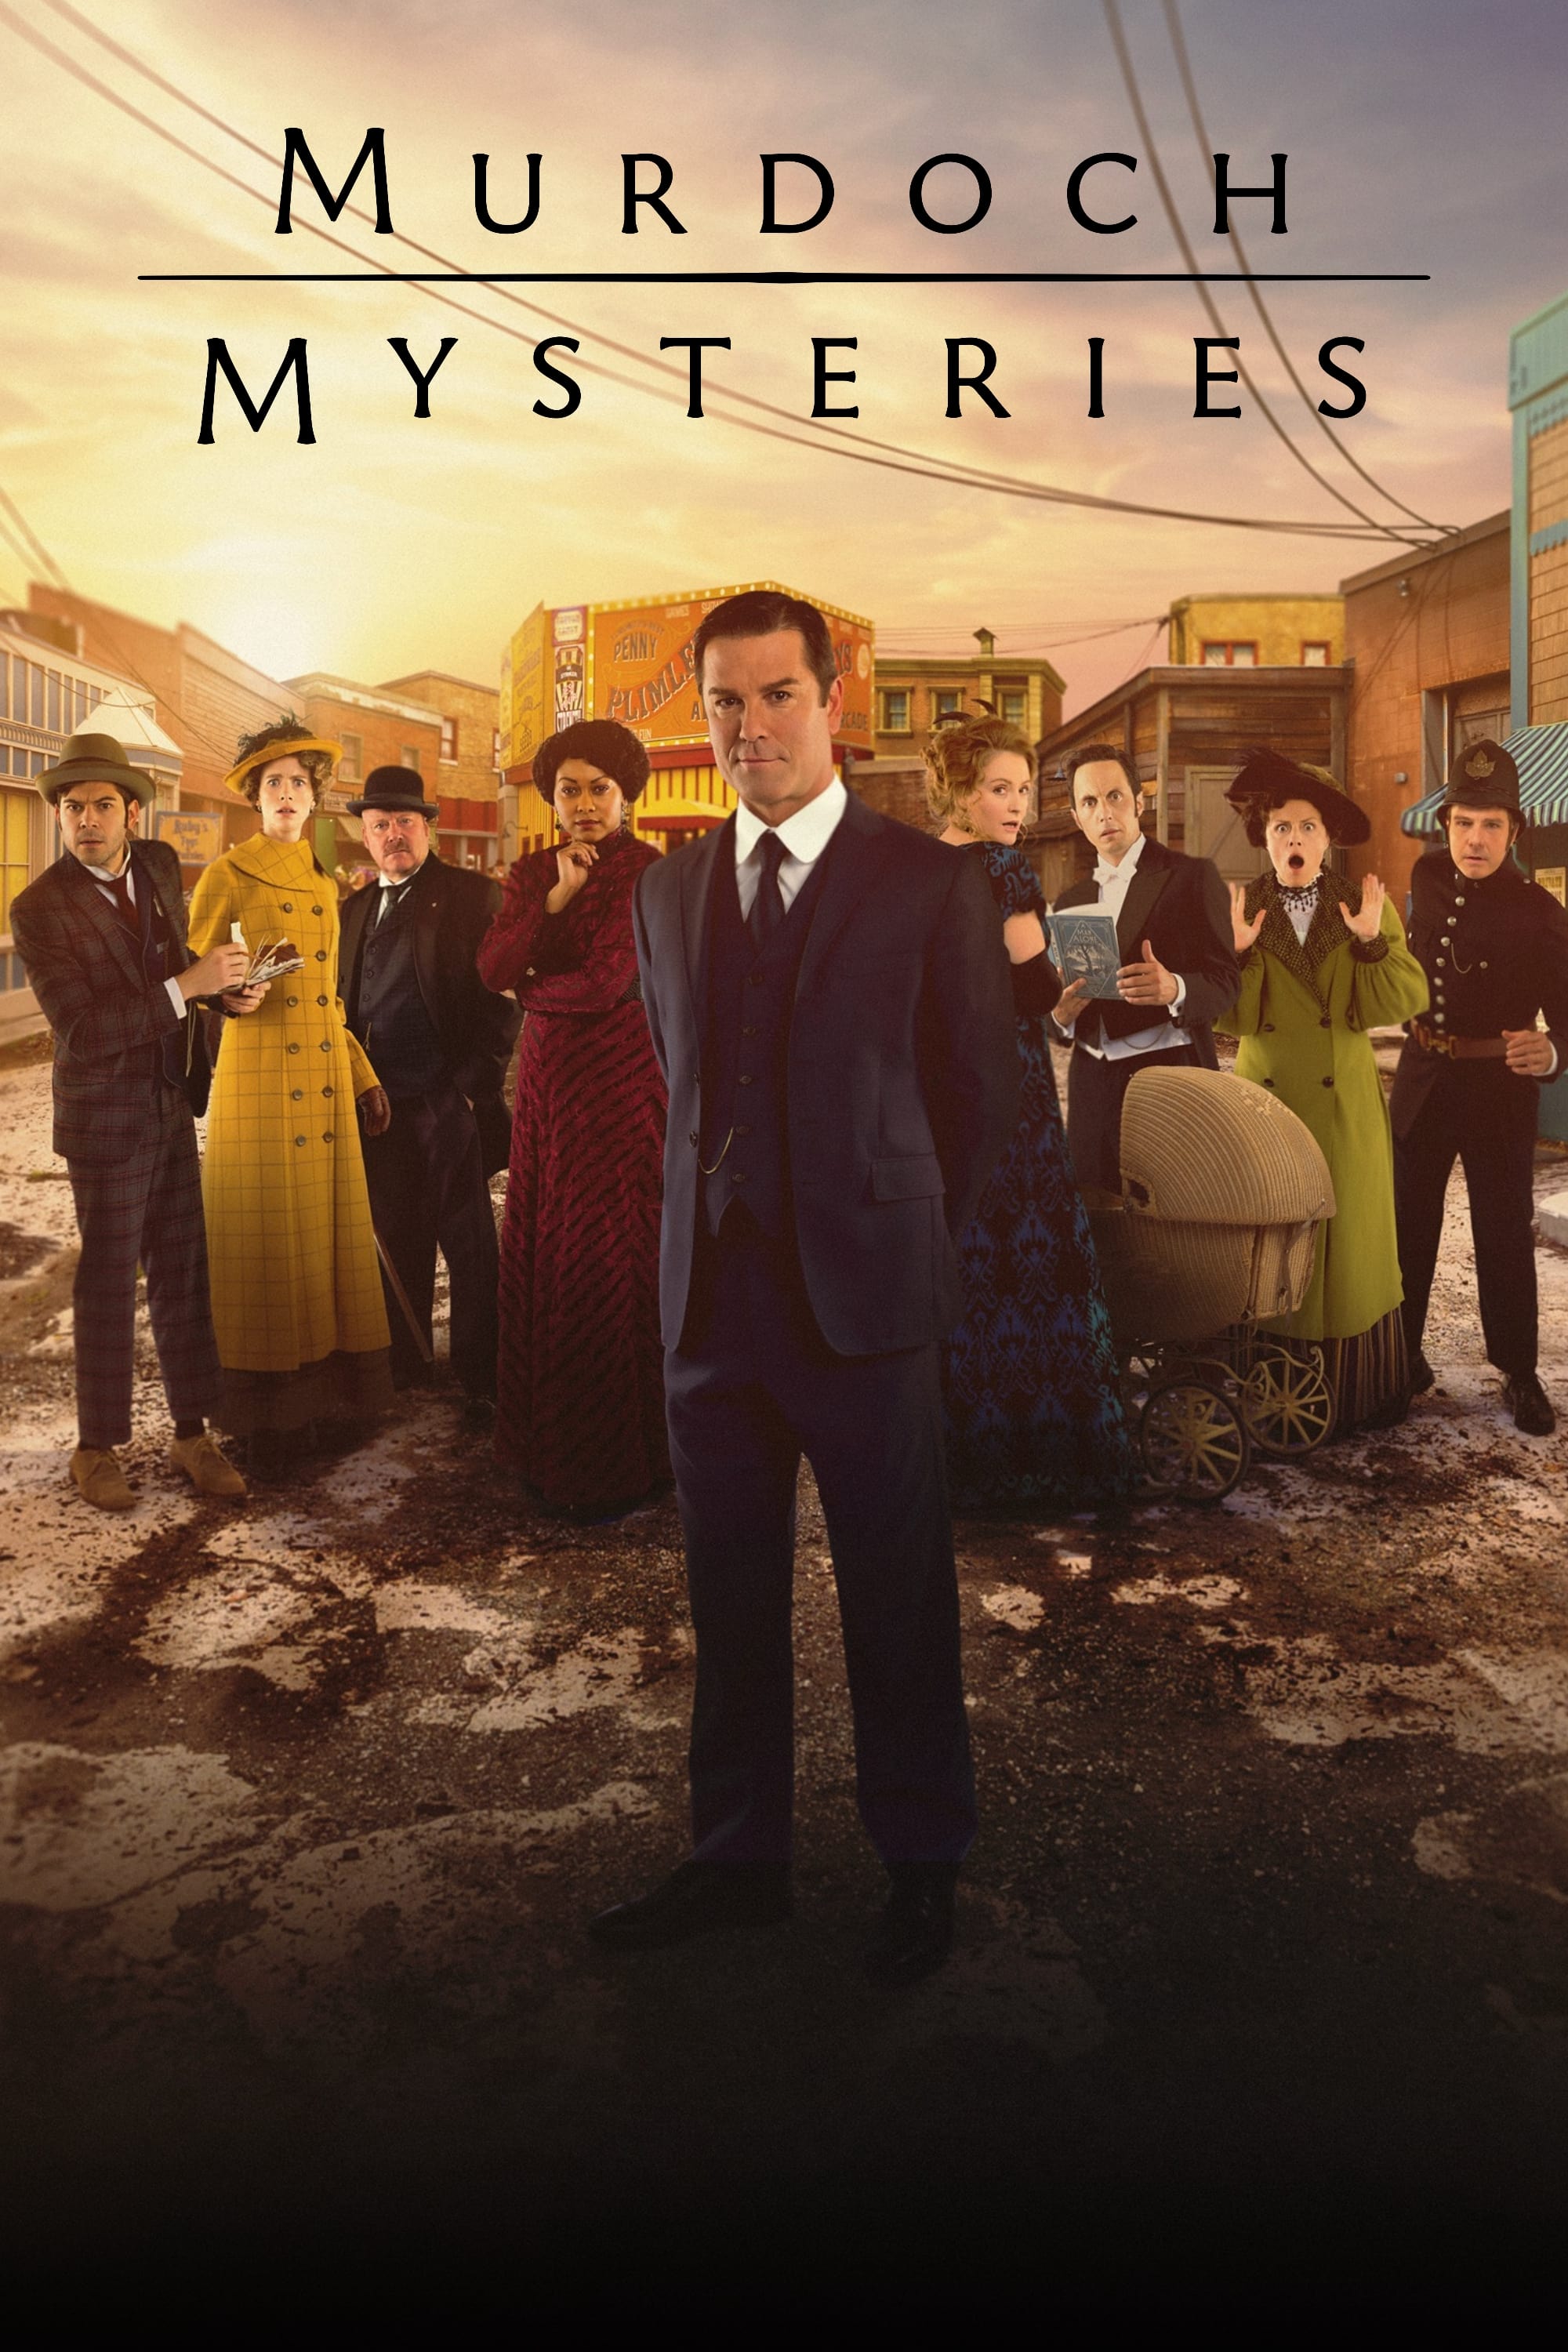 Murdoch Mysteries TV Shows About Victorian England